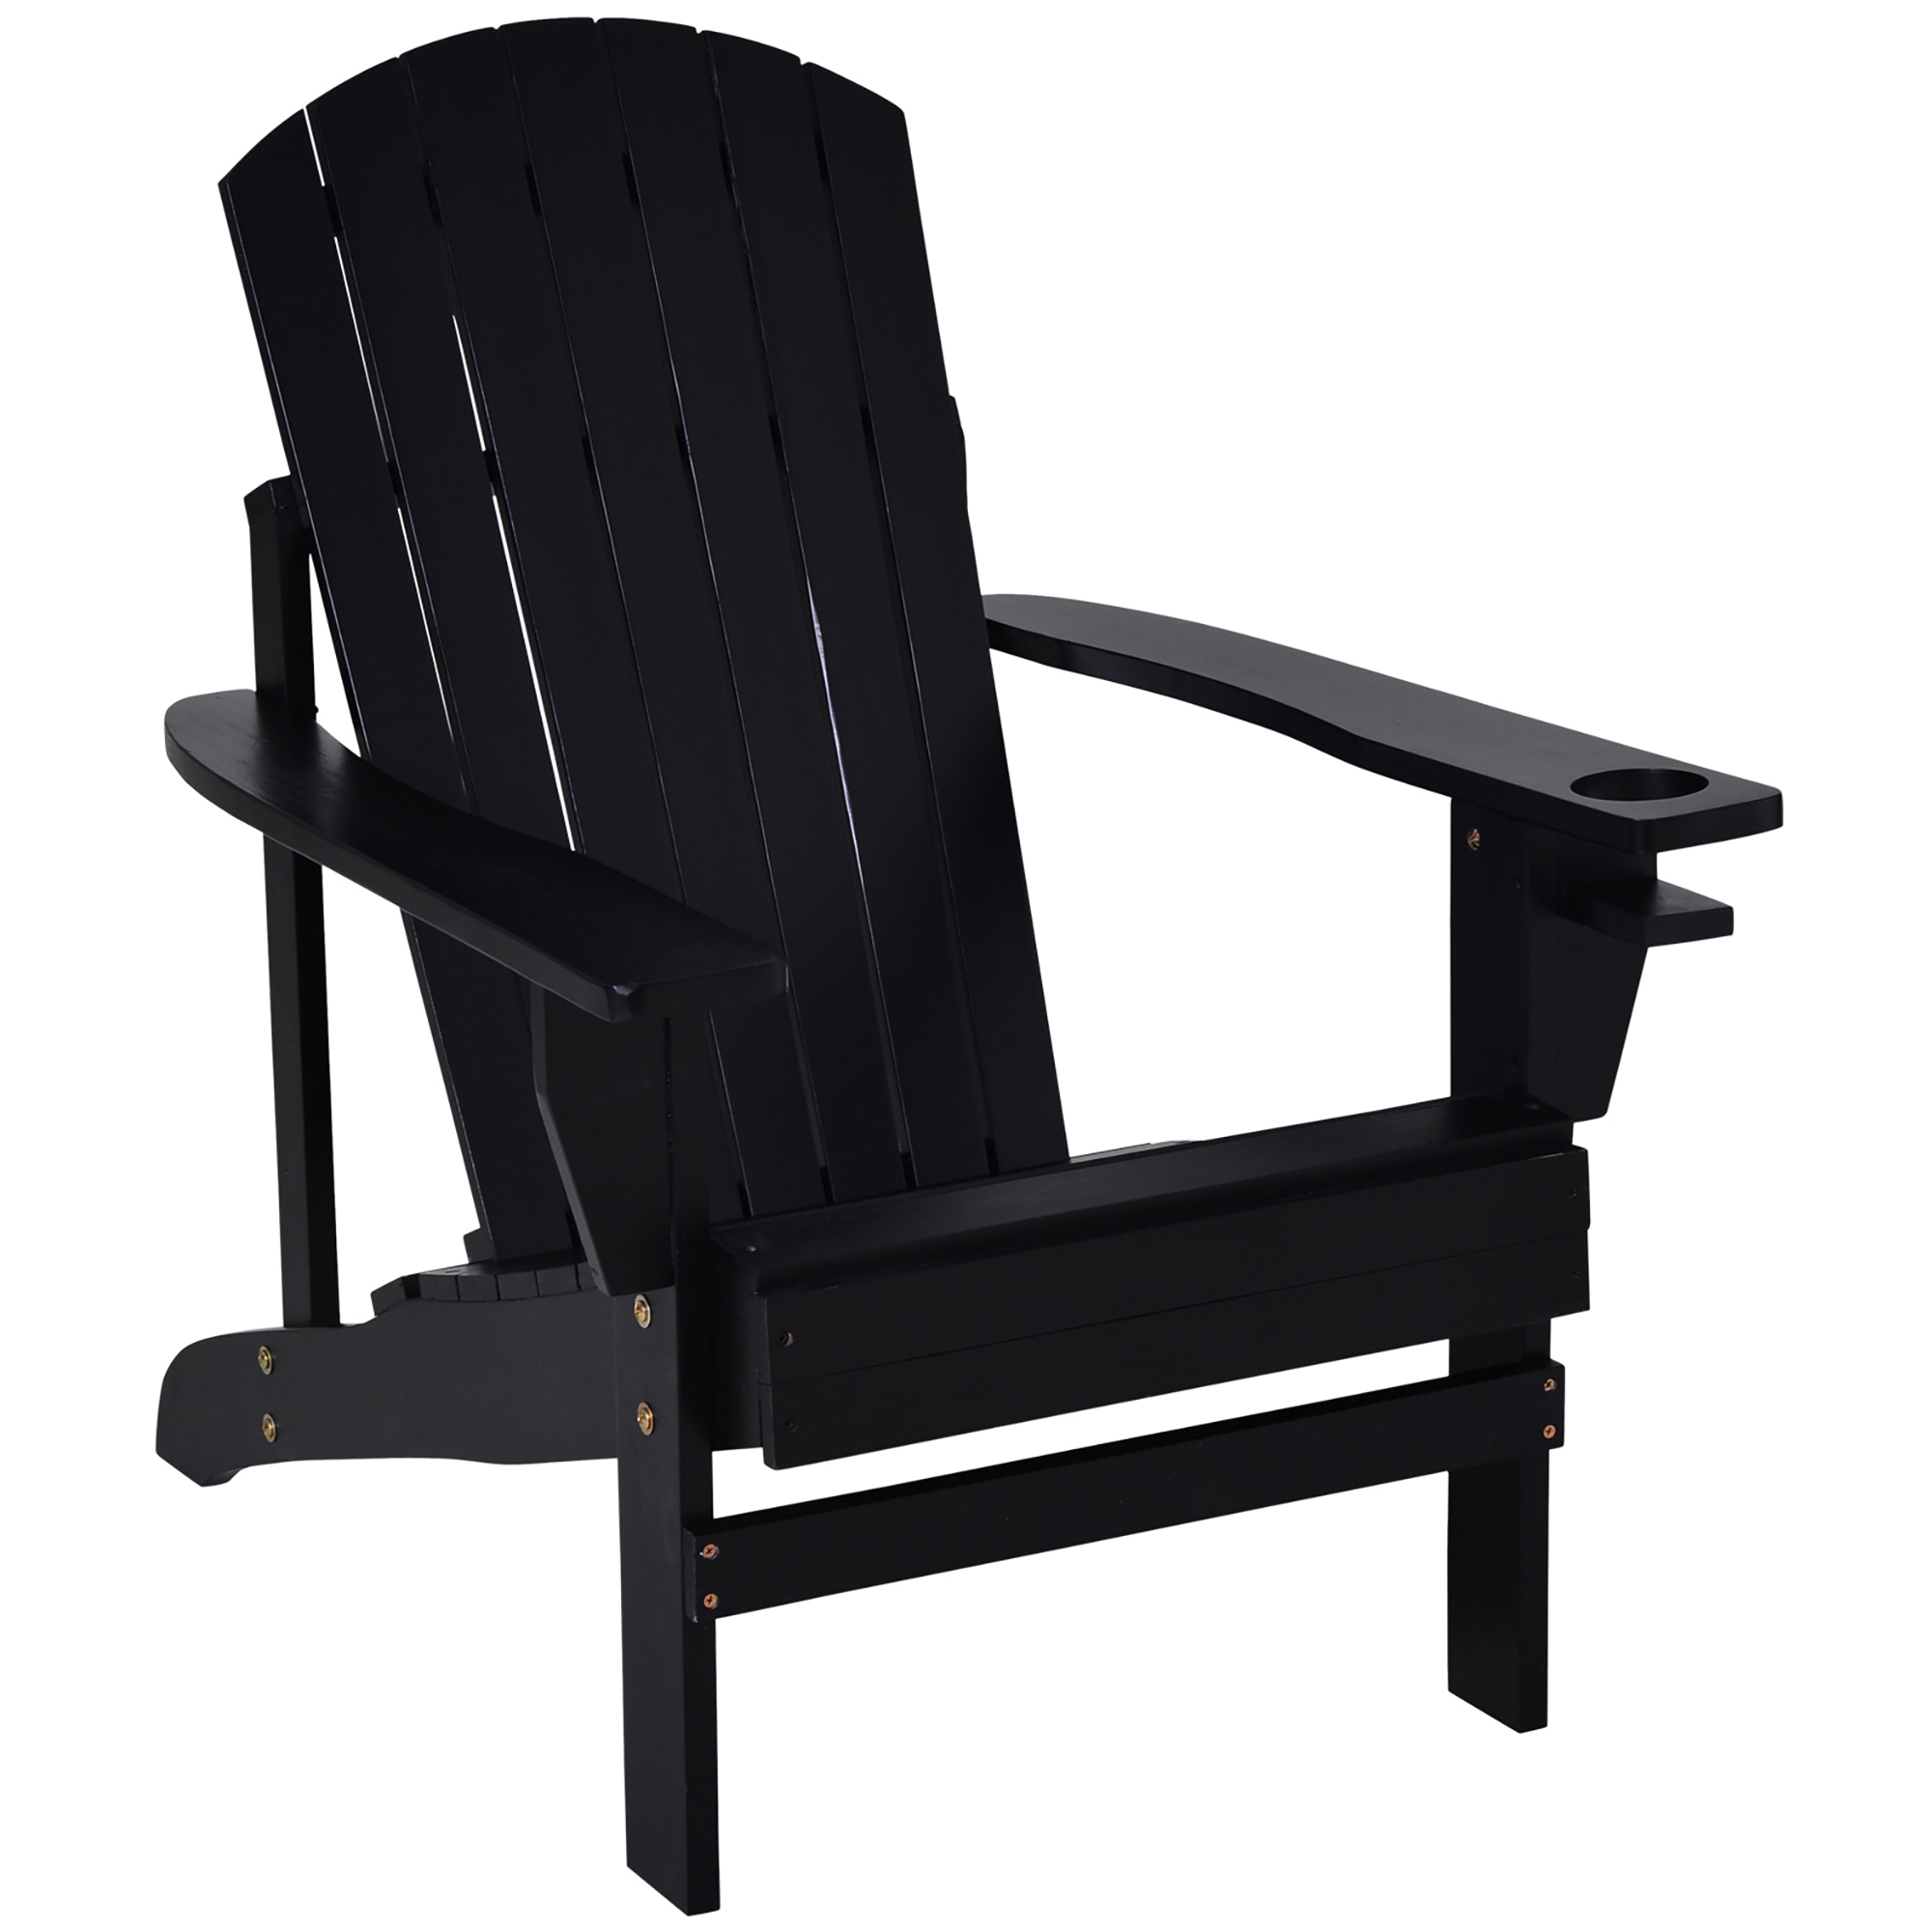 Outsunny Wood Adirondack Chair, Wooden Outdoor & Patio Seating, Black - image 1 of 9